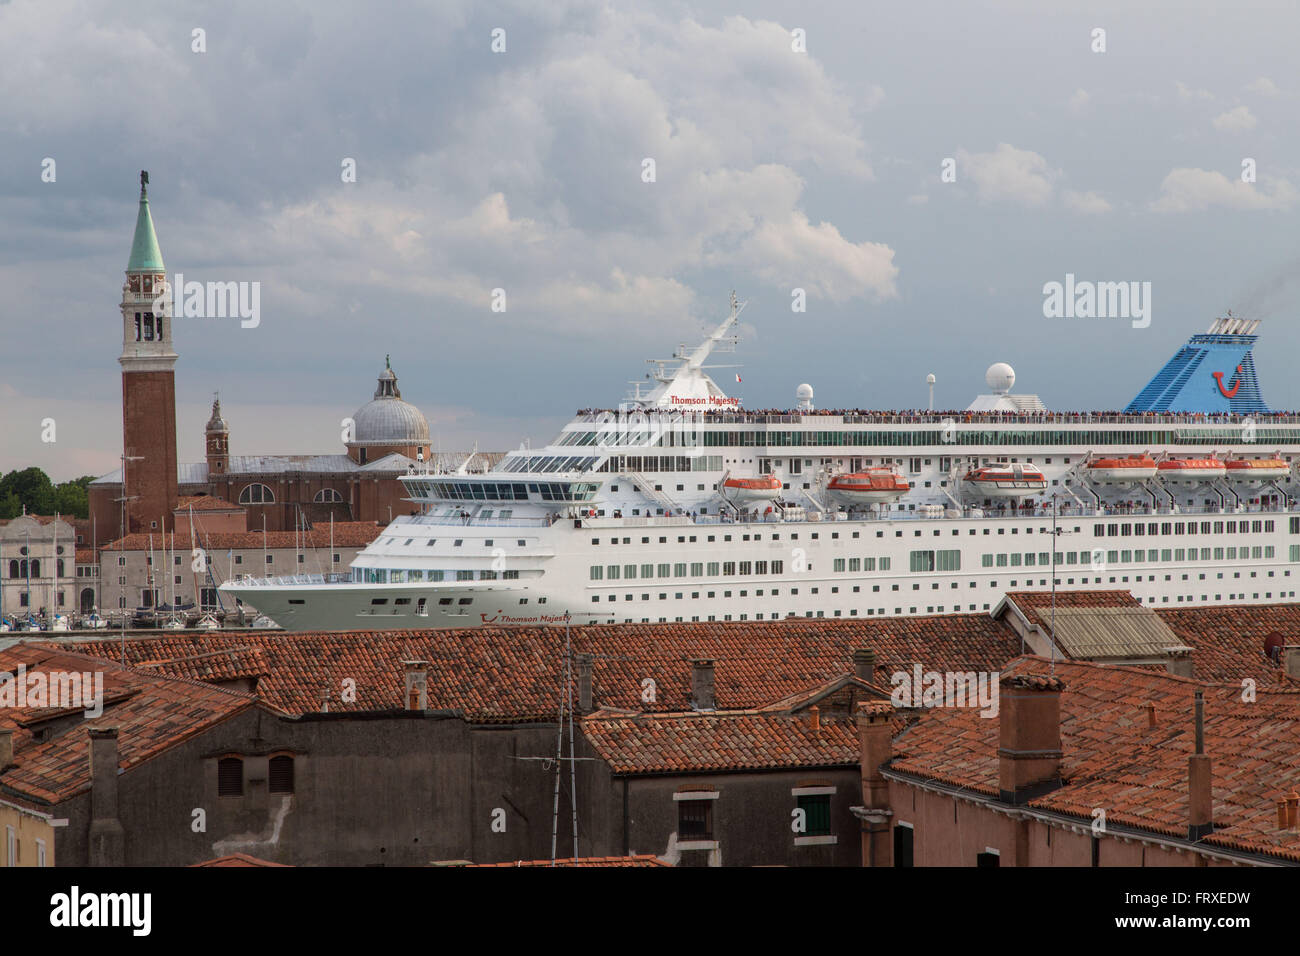 Cruise ship protest, Cruise ship towering above the roofs in the Giudecca Canal, Venice, Veneto, Italy Stock Photo